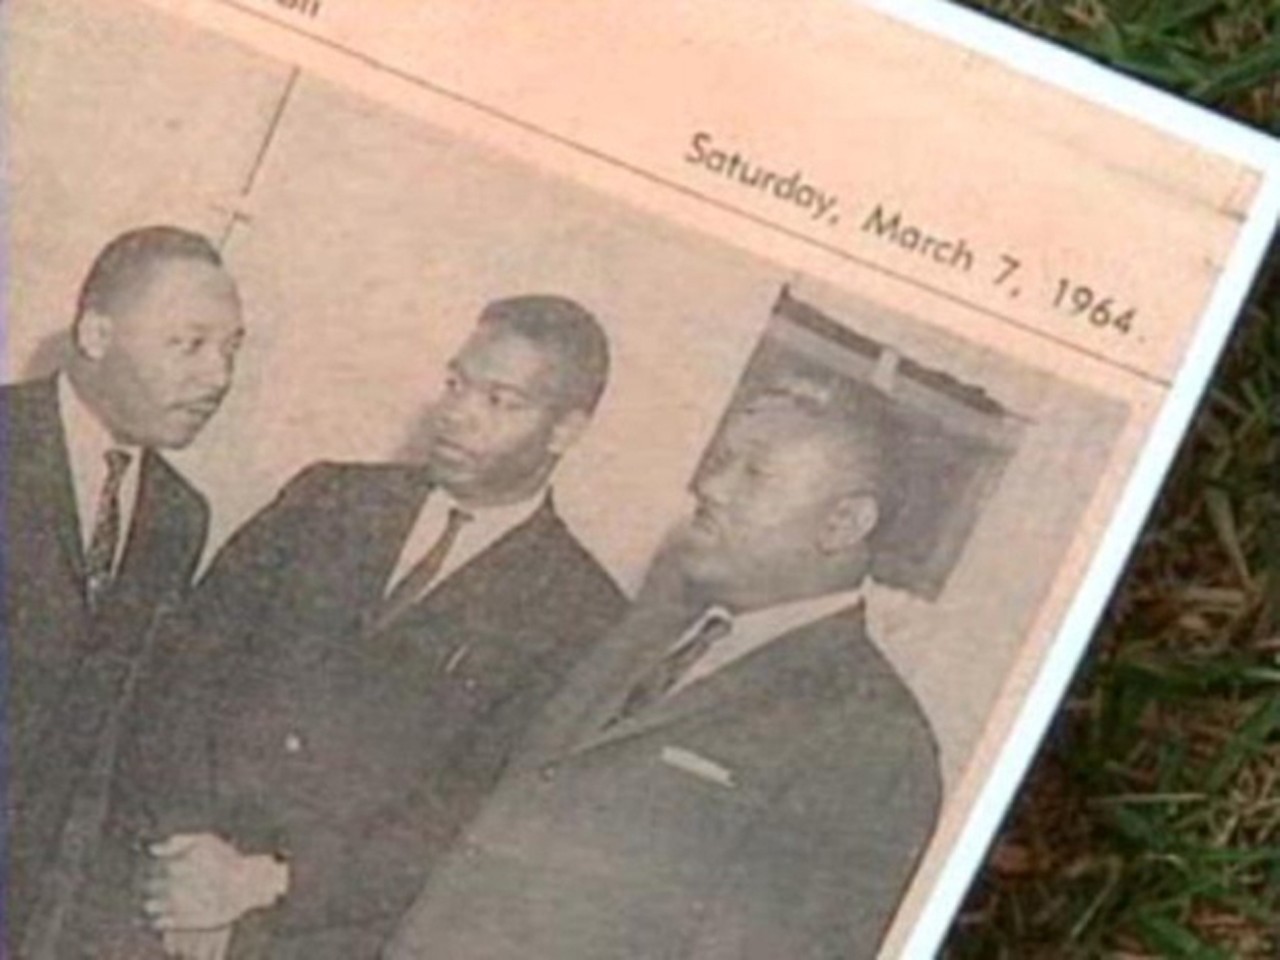 Martin Luther King, Jr. gave a speech at Tinker Field in March 1964 about integration and racial equality. The civil rights leader advocated peaceful protests during a time when Orlando was still segregated.Photo via Wesh 2 News